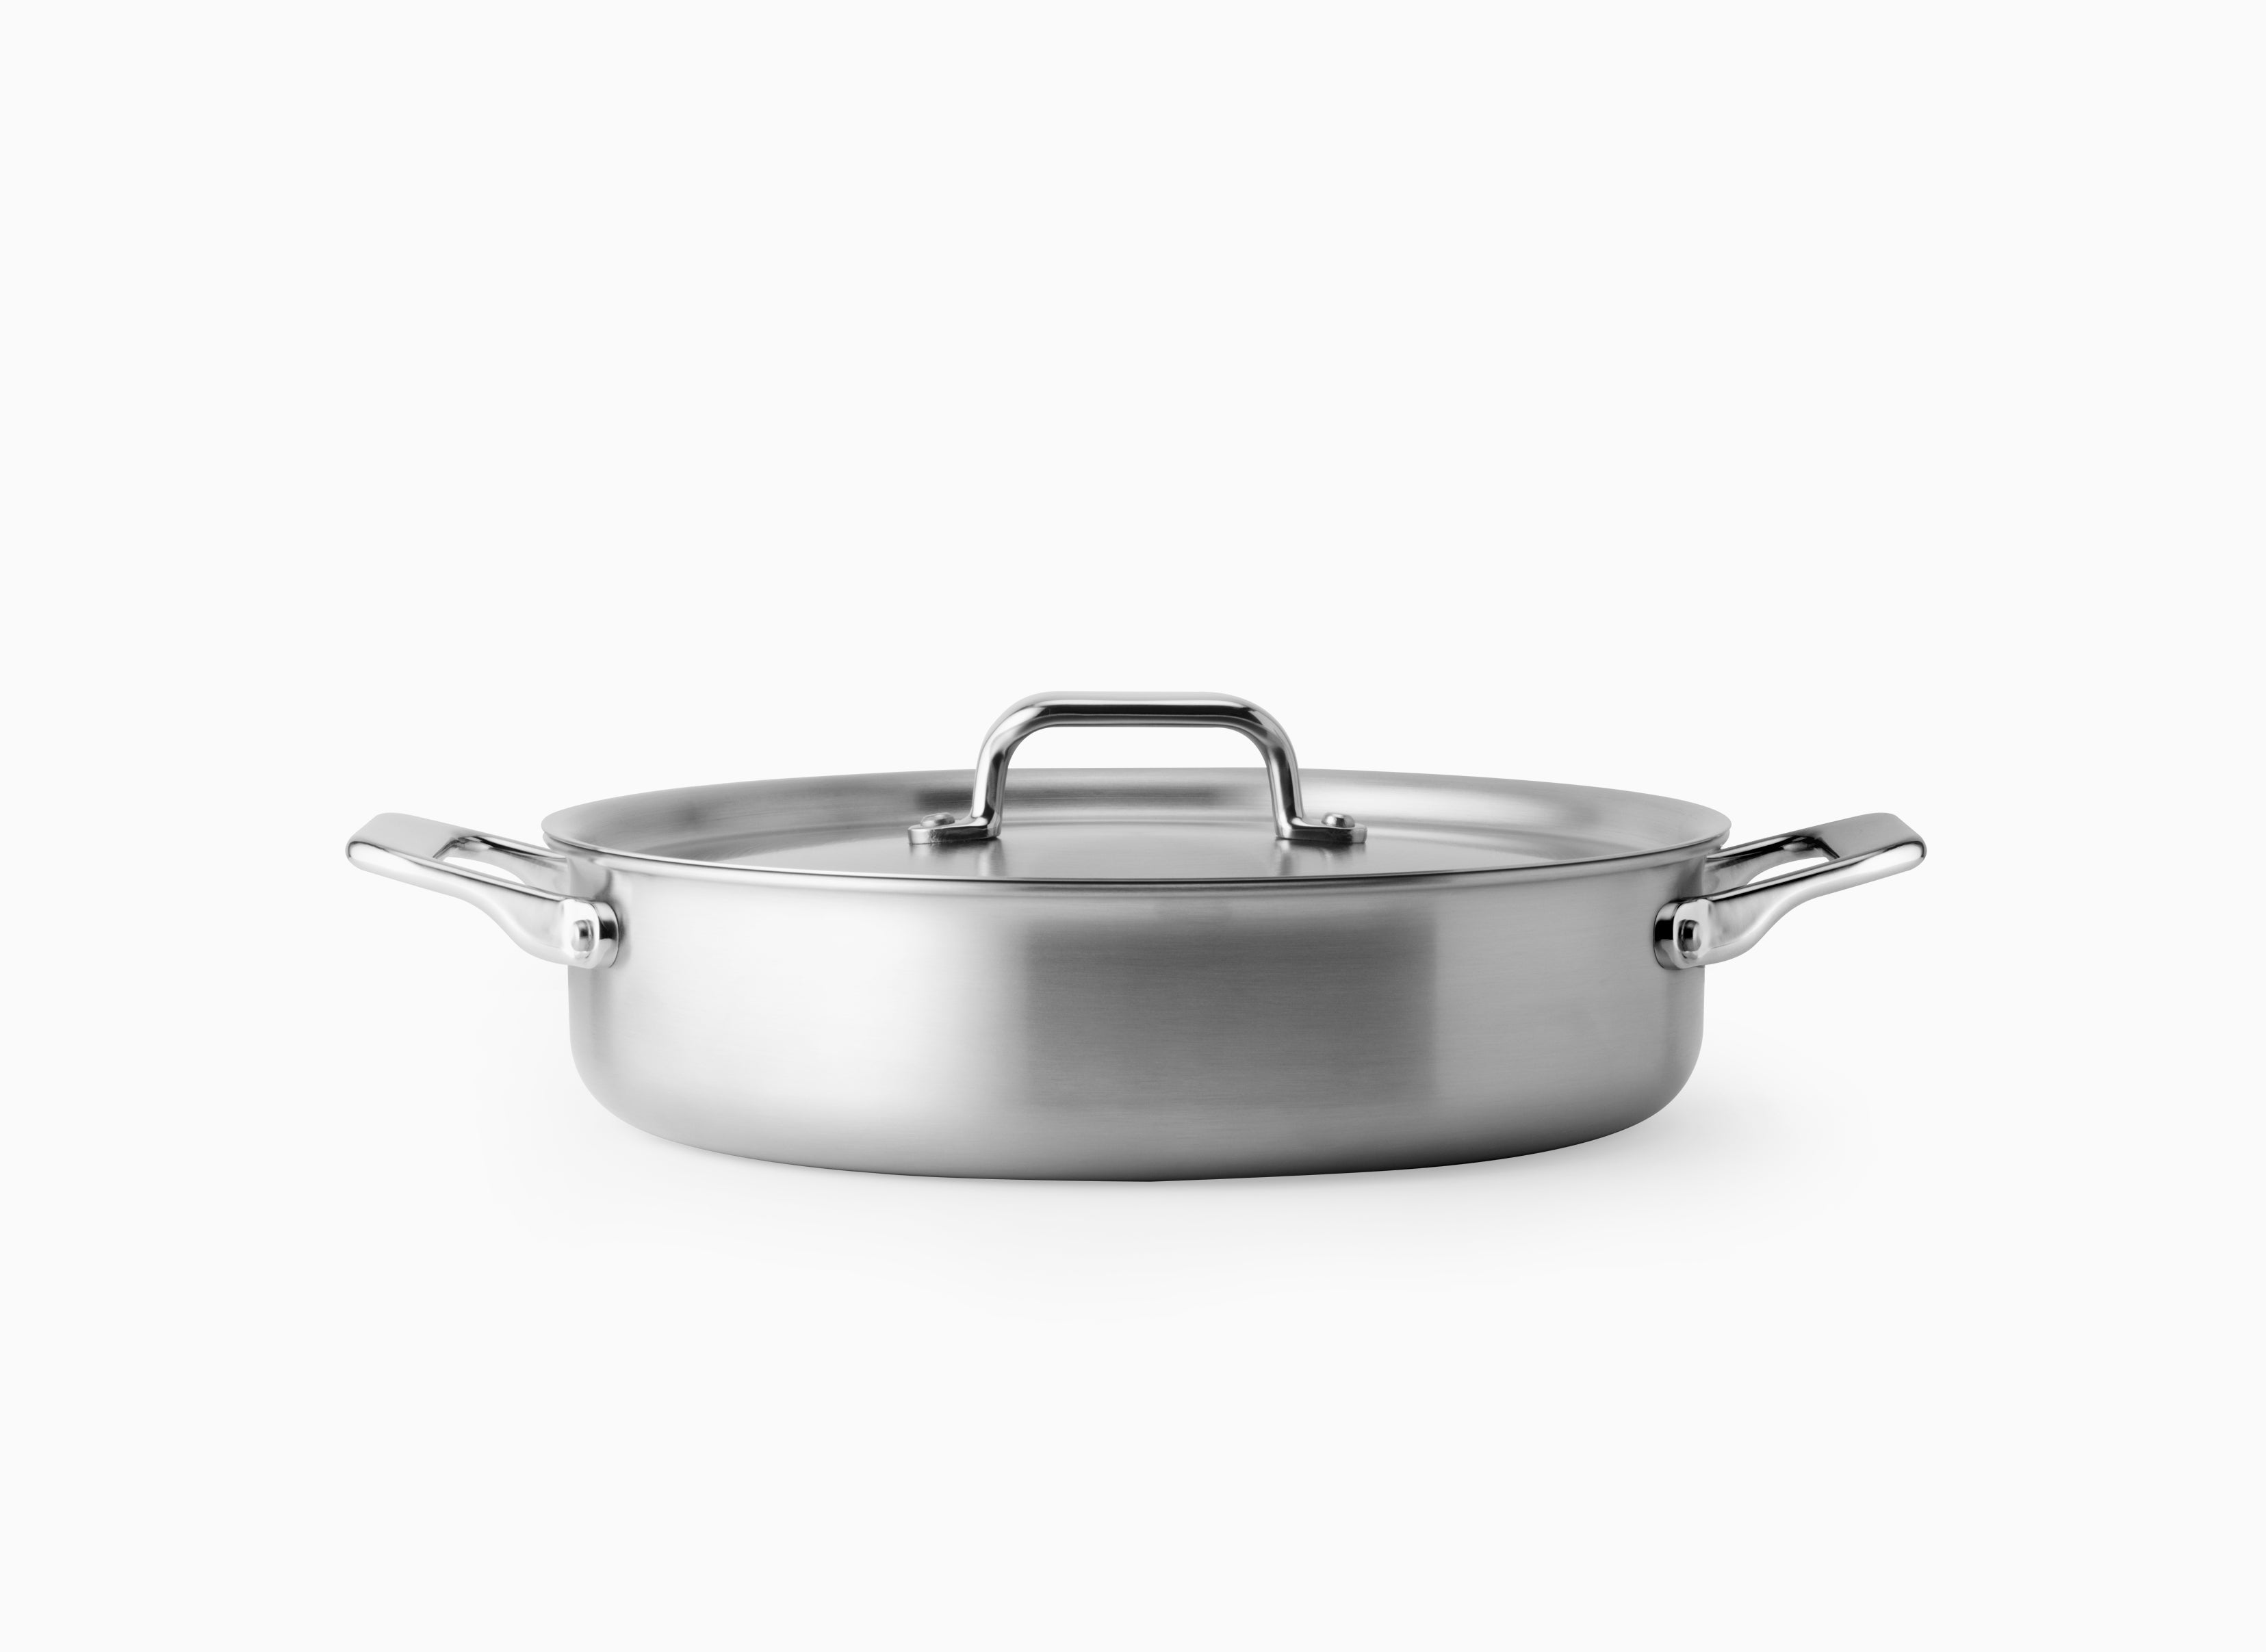 Paderno Stainless Steel 19 Quart Rondeau Pot